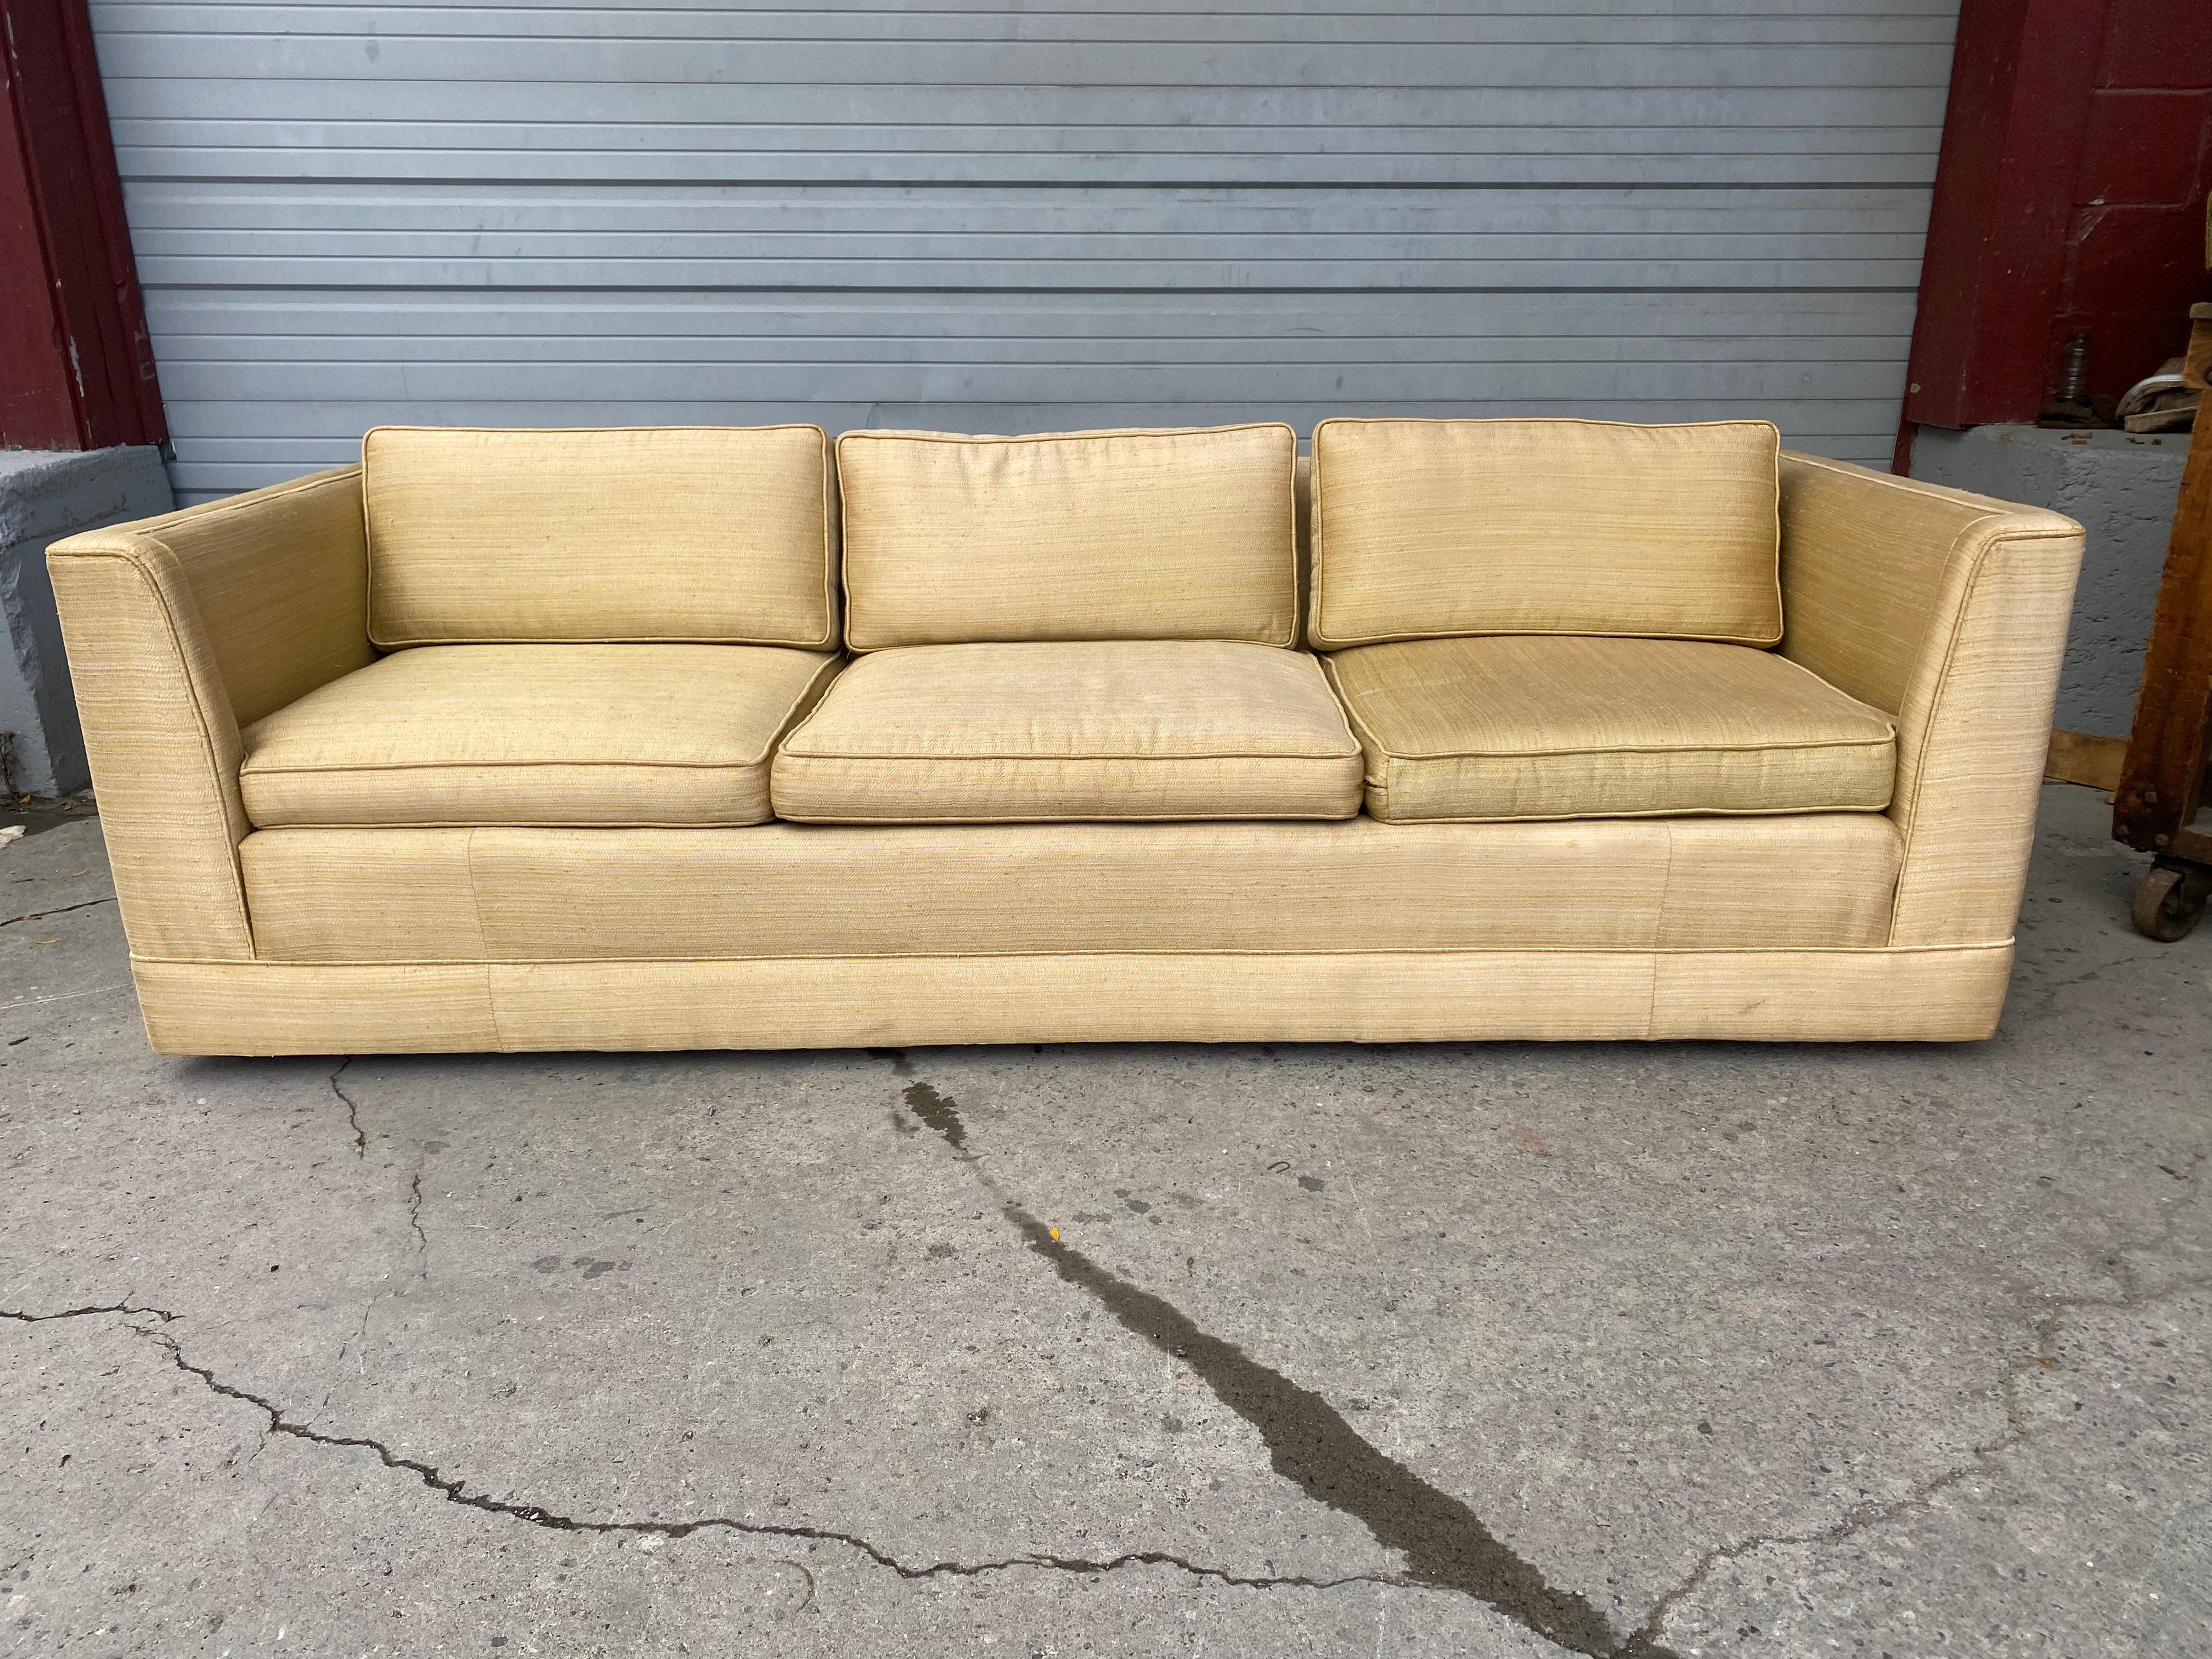 Wonderful and unusual,, Vintage late 1940s ,,early 1950s Tuxedo ,even-arm sofa manufactured by Henredon,, Unusual arm design,, Retains original silk fabric upholstery,, usable ,,but would be amazing reupholstered..Superior quality and construction..